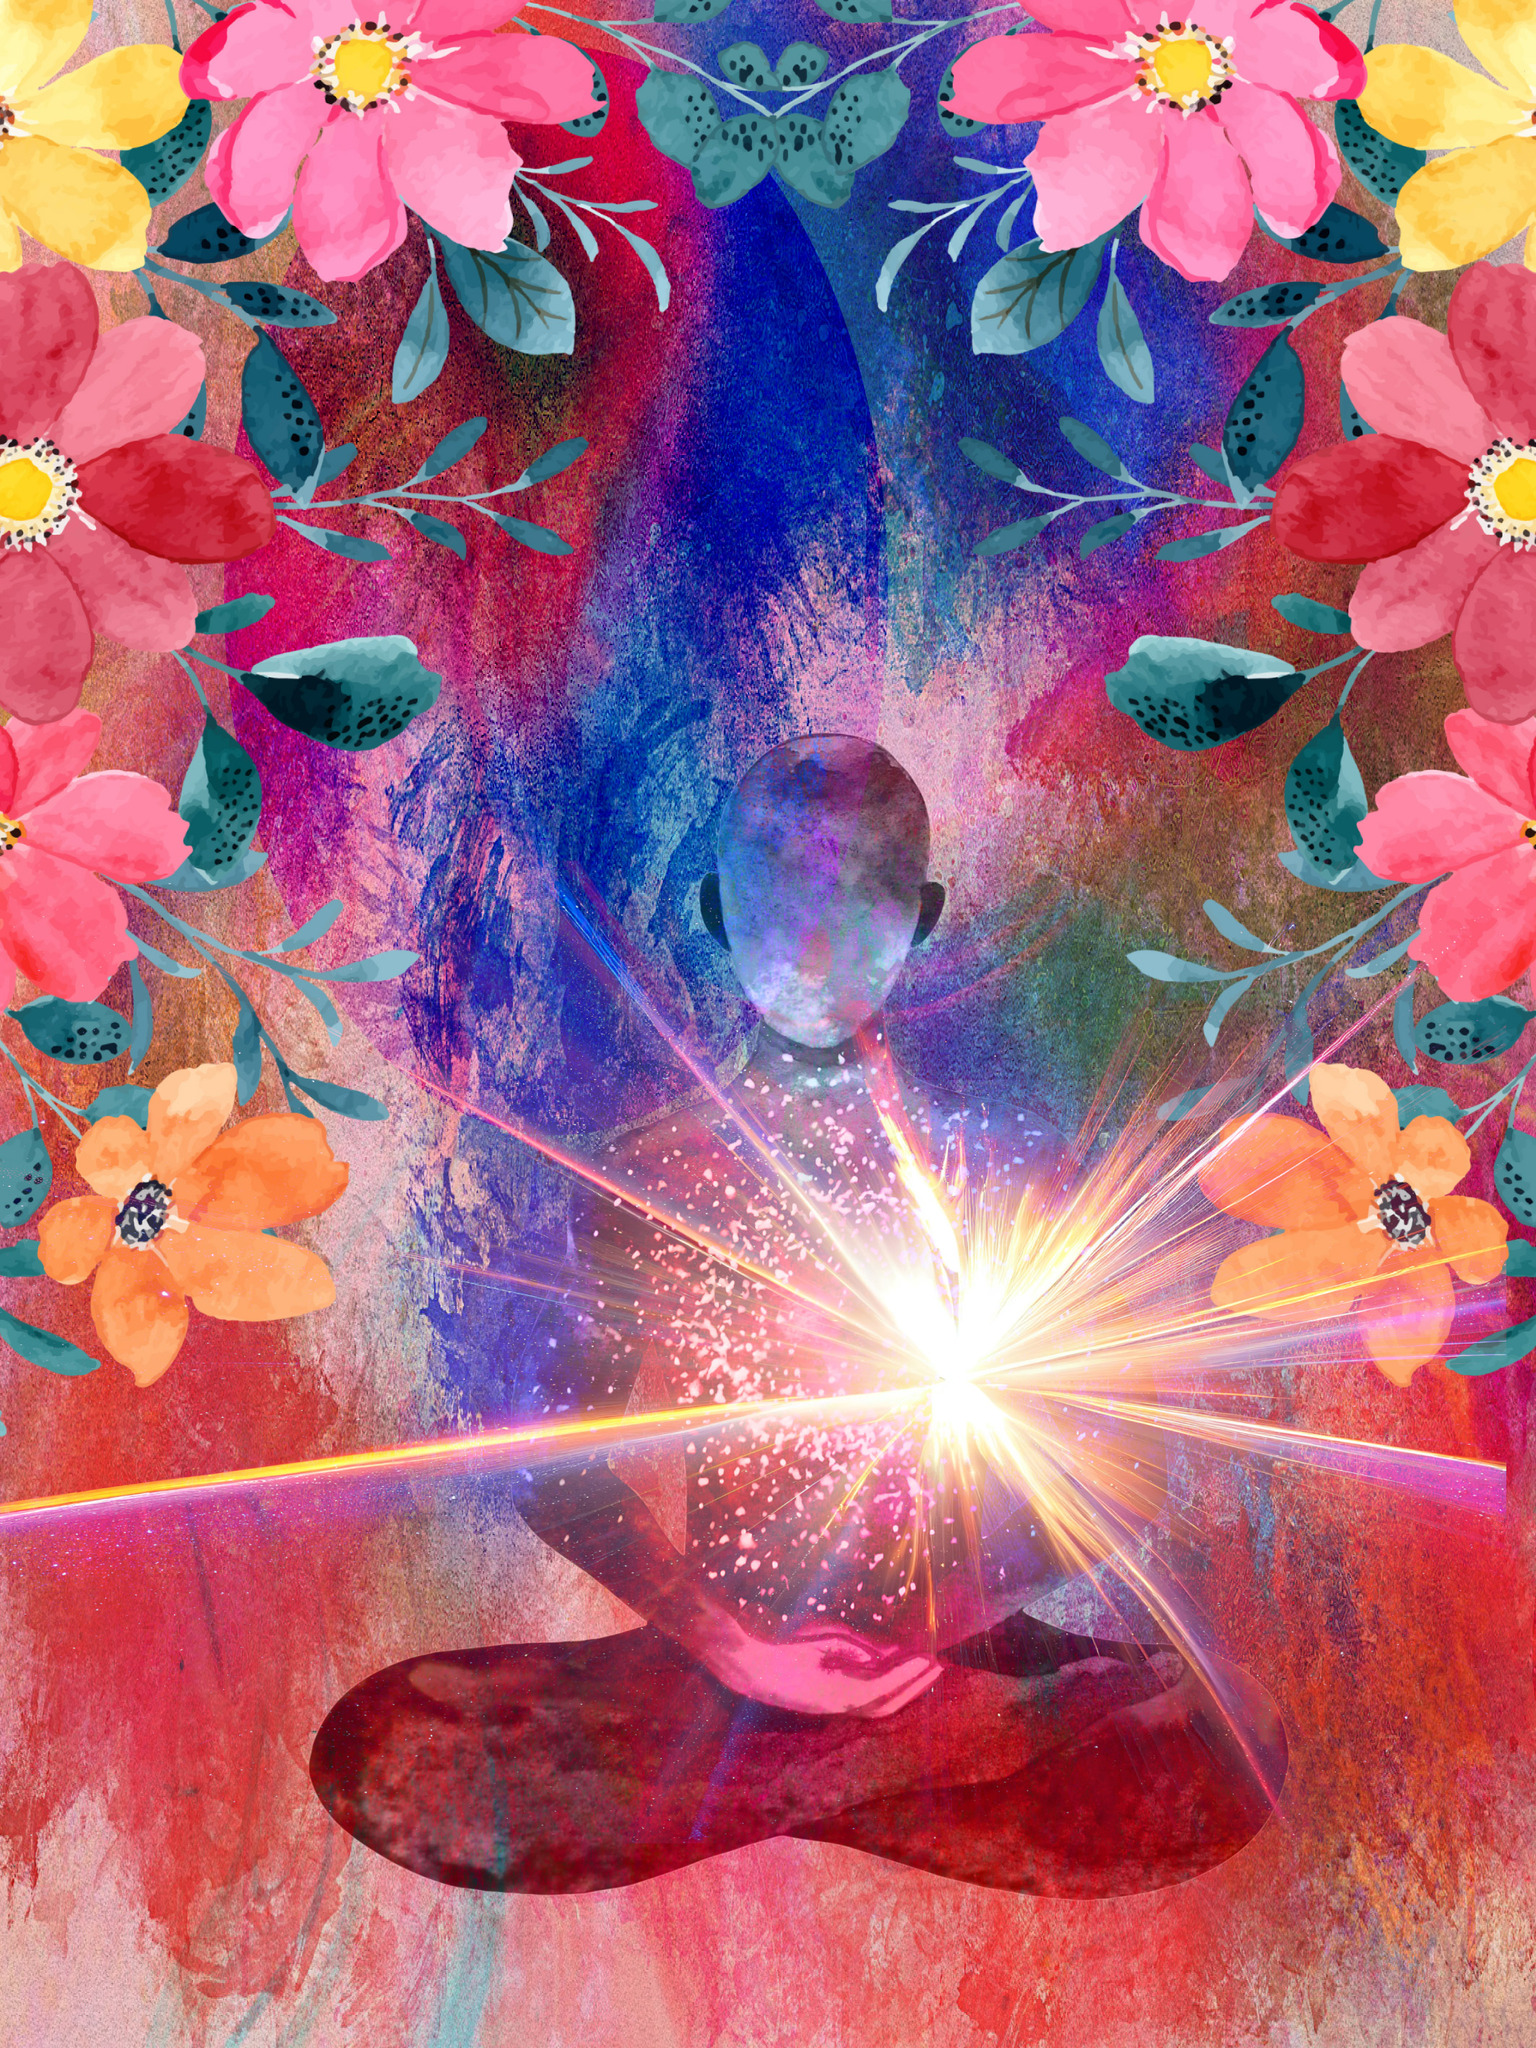 Graphic Art "With the light of the higher self"